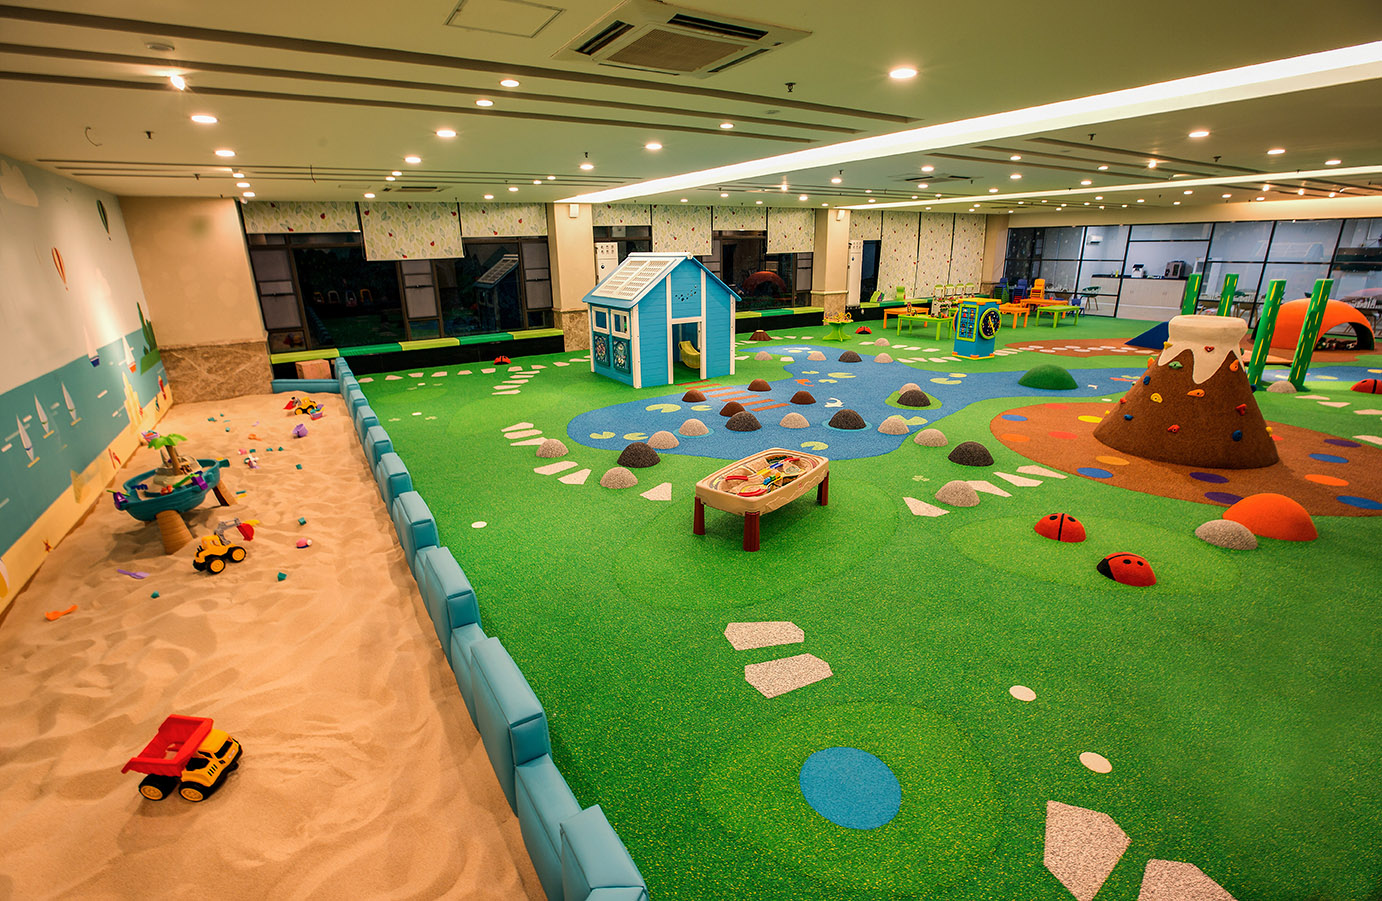 A children's play paradise with a woodland experience with various play elements